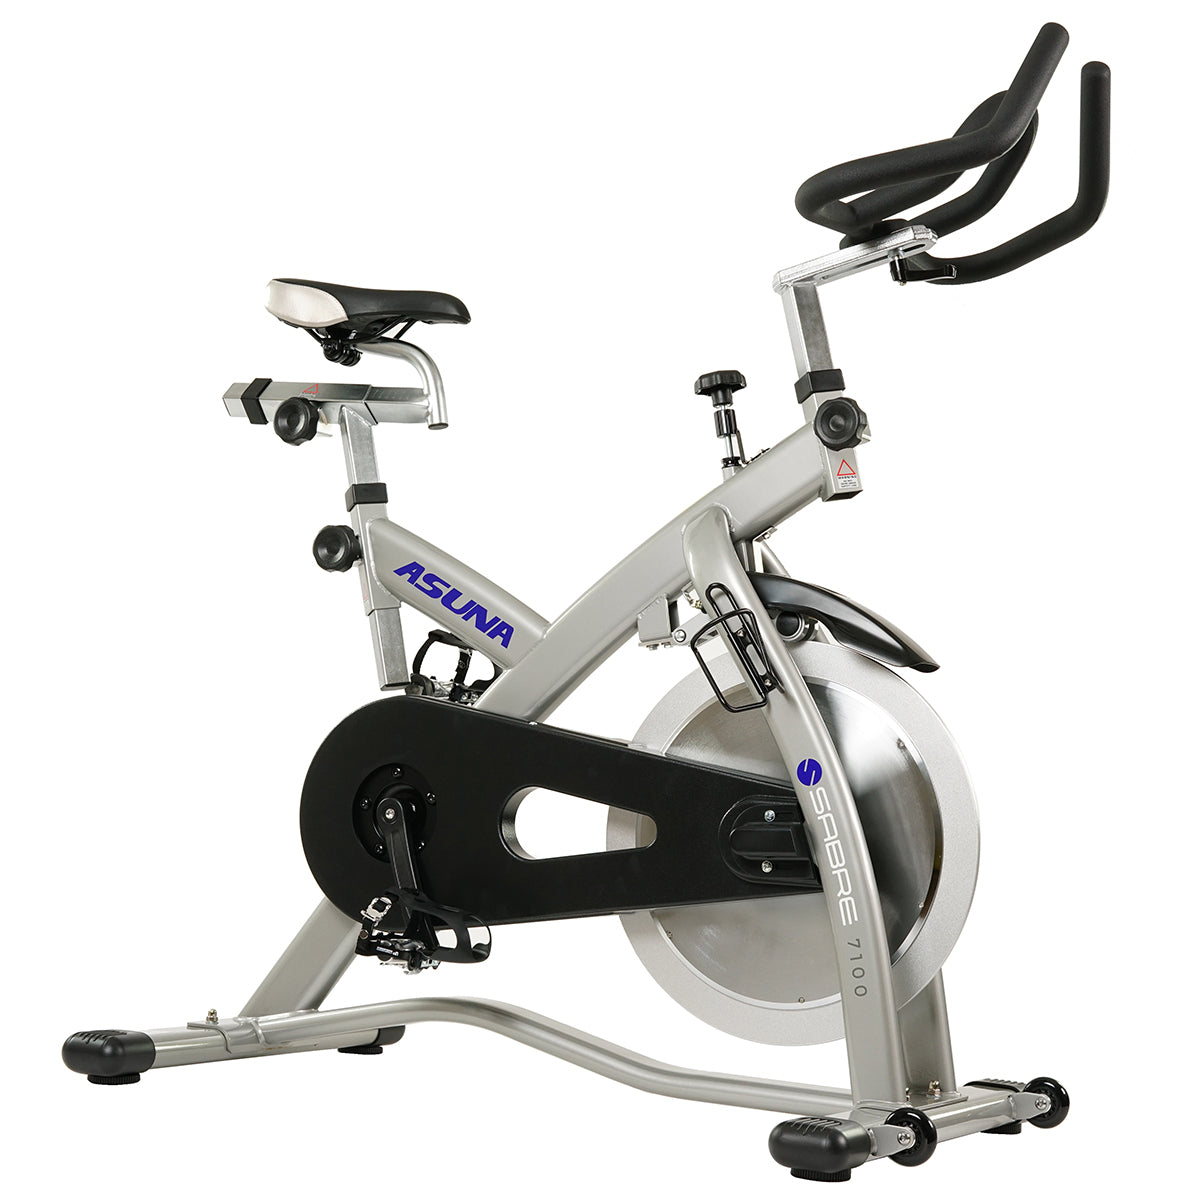 Sabre Cycle Exercise Bike - Magnetic Belt Drive Commercial Indoor Cycling Bike